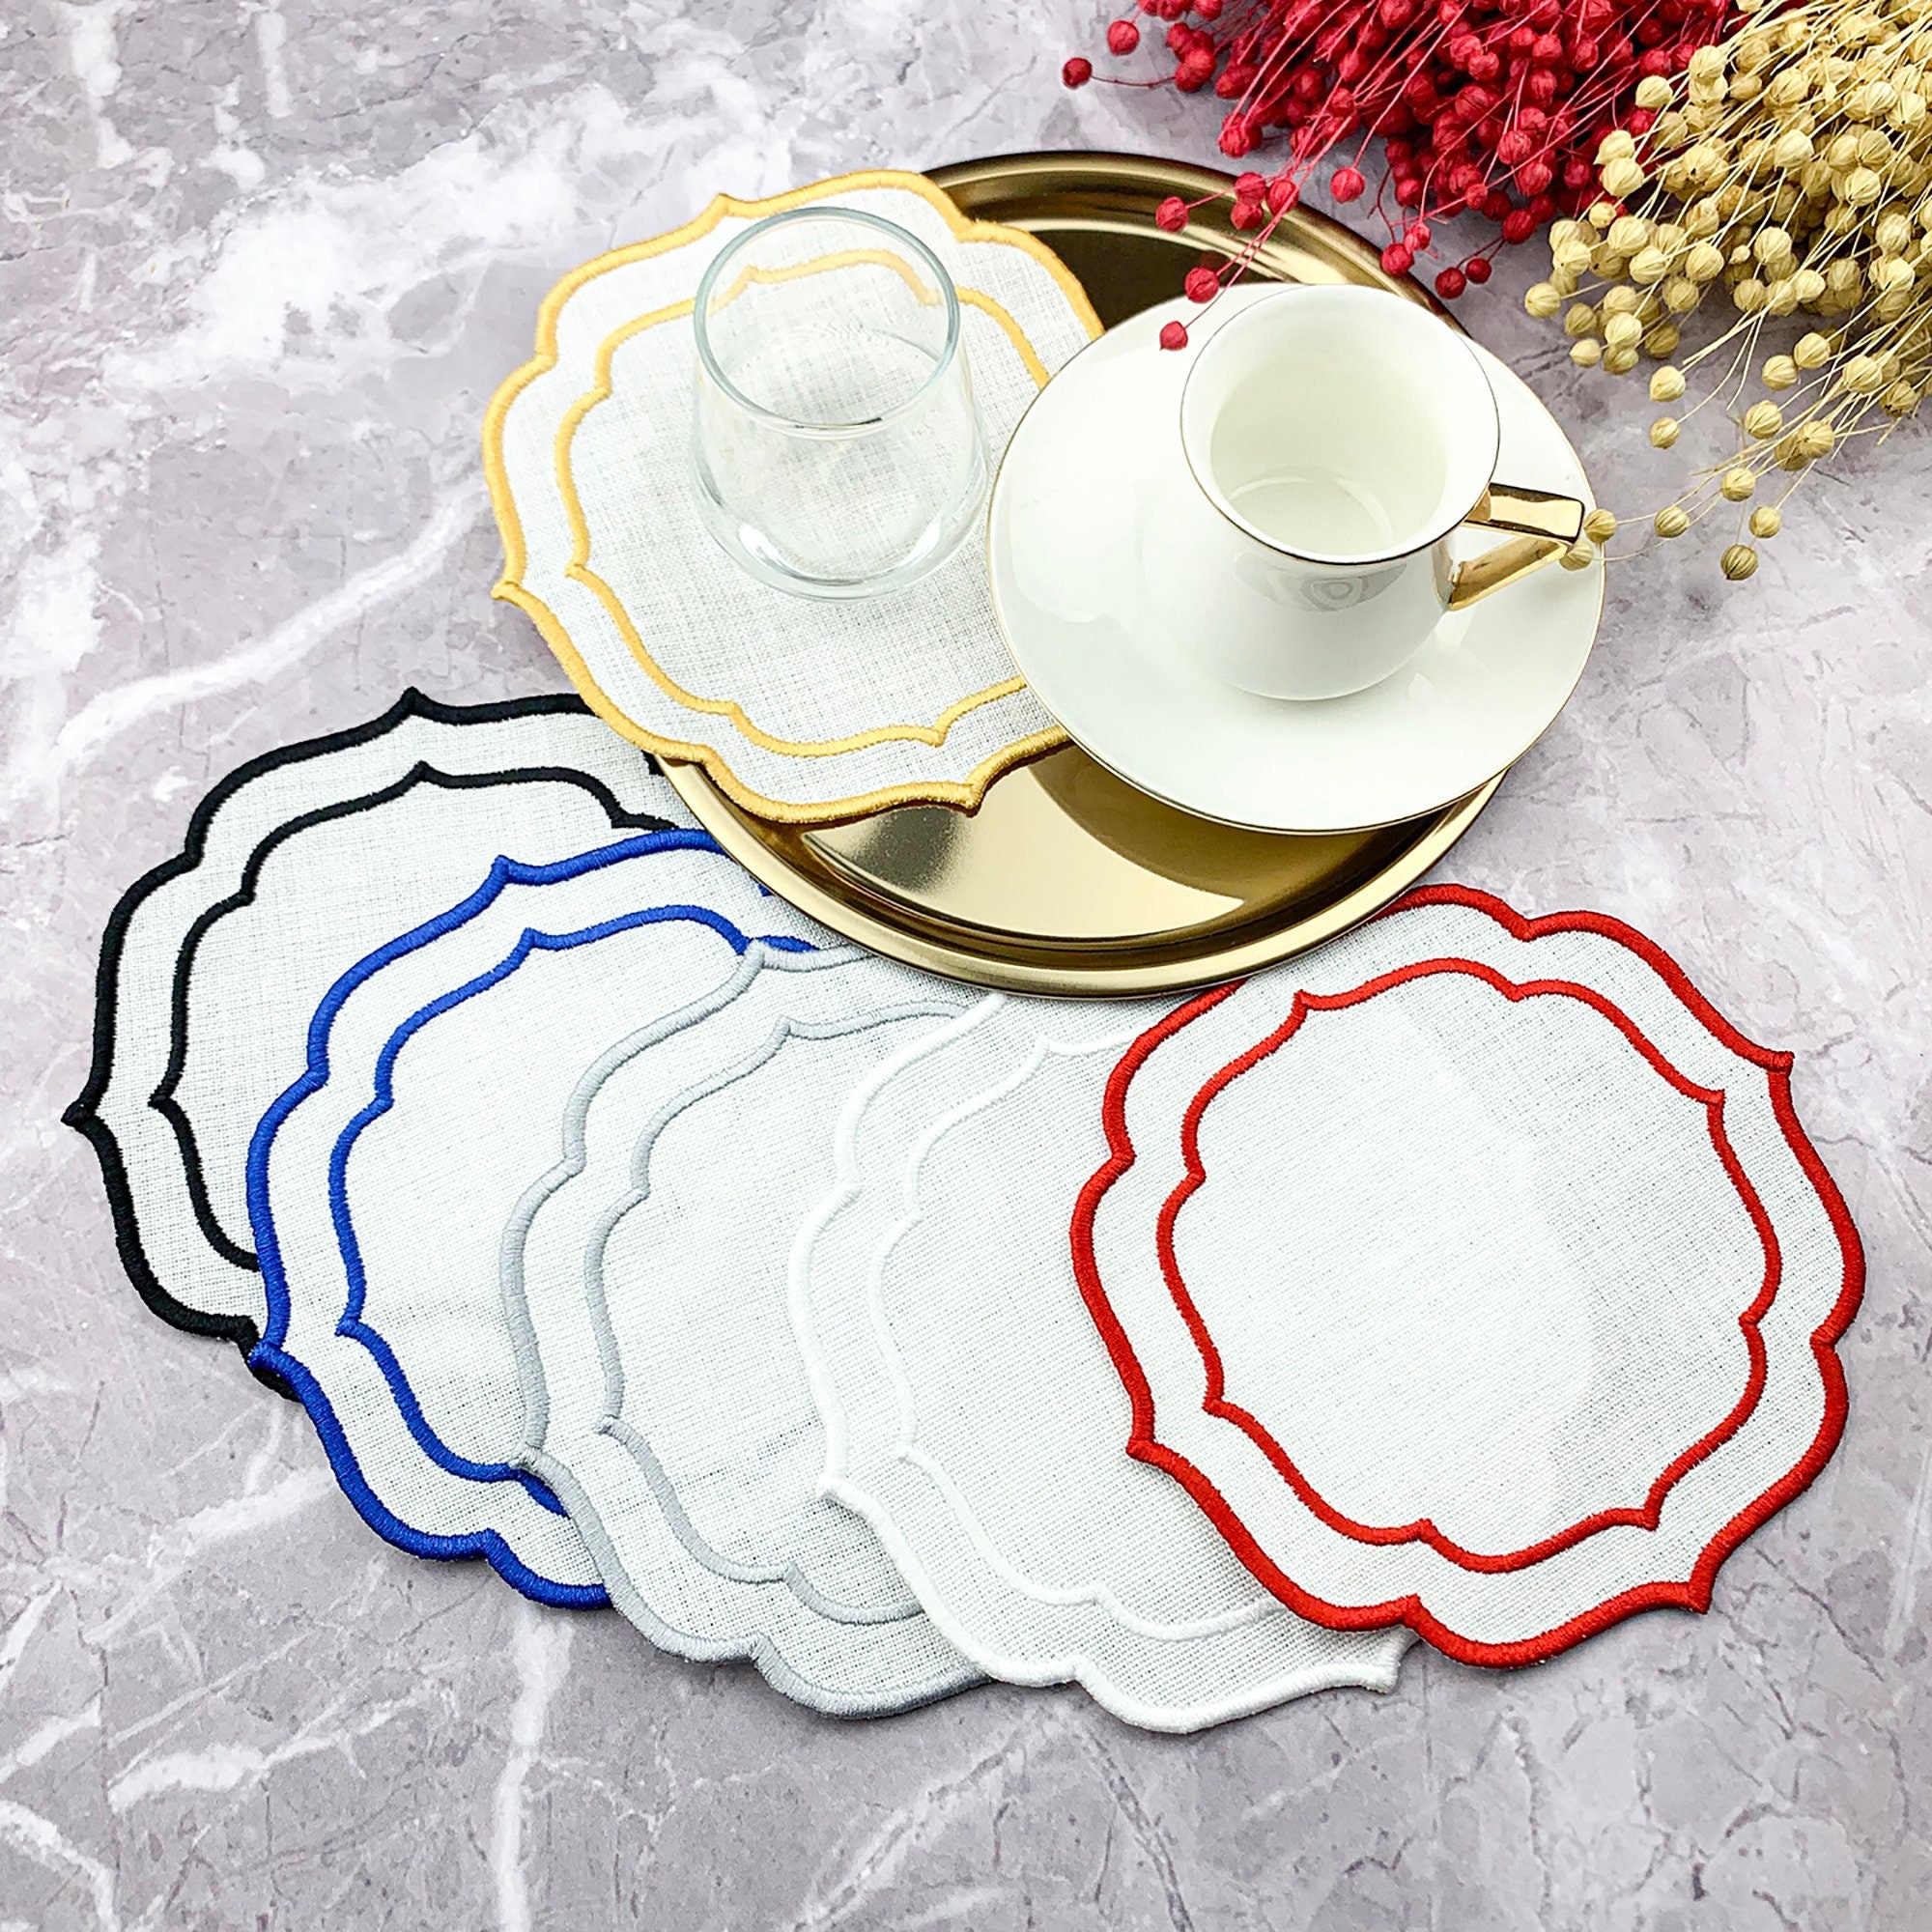 Scalloped Napkin Coaster Doily 2 types round shape in assorted sizes ITH in  the hoop easily machine embroidery designs Set of 2 festoon edge